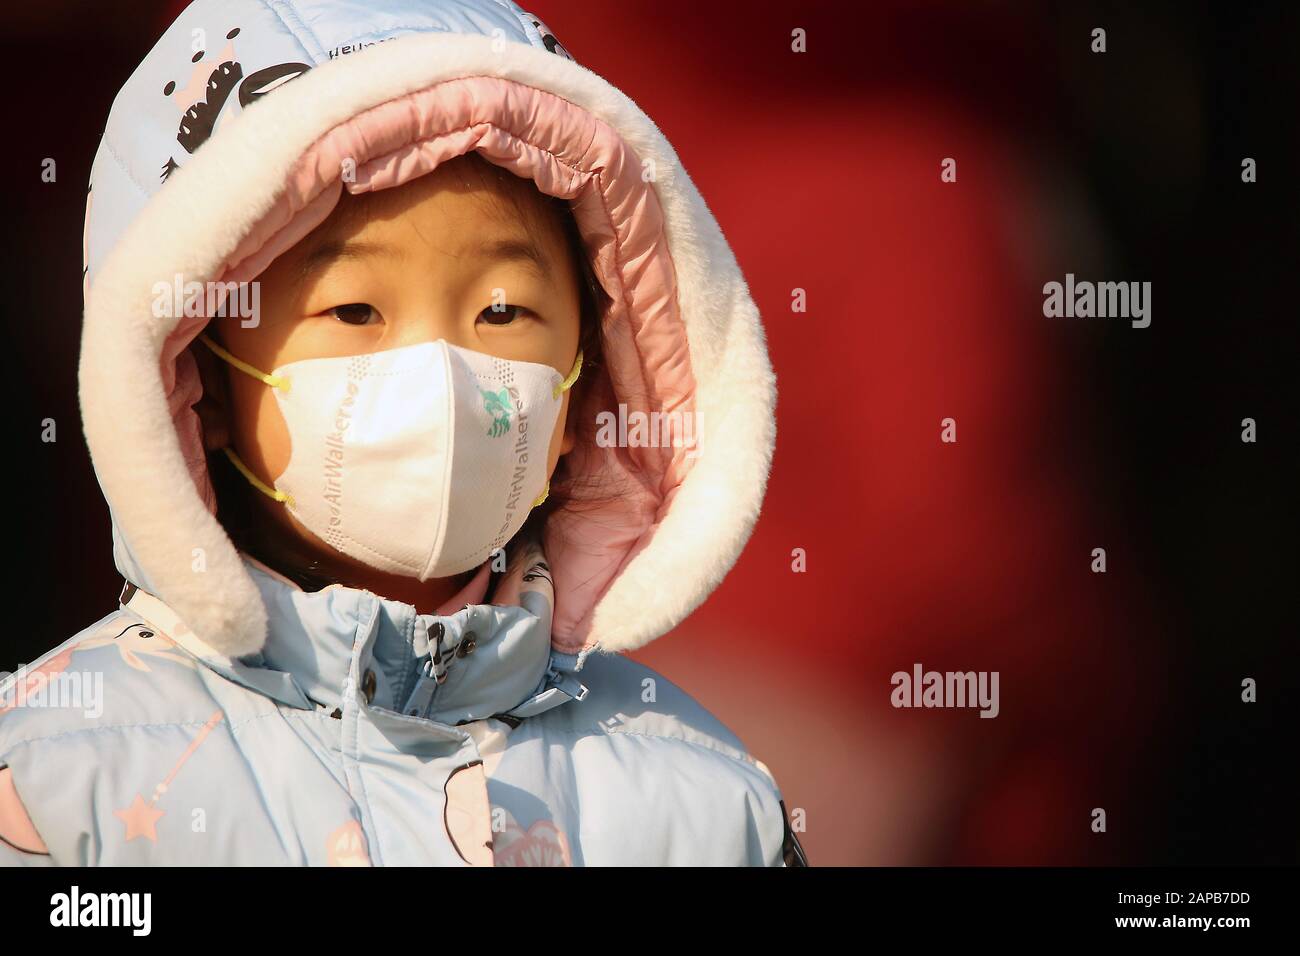 Beijing, China. 22nd Jan, 2020. Chinese wear protective respiratory masks in Beijing on Wednesday, January 22, 2020. Health authorities in China reported the country's sixth death from a new type of coronavirus, as the country braces for the Lunar New Year travel boom amid concerns over a possible outbreak similar to that of the SARS virus in the early 2000s. Photo by Stephen Shaver/UPI Credit: UPI/Alamy Live News Stock Photo